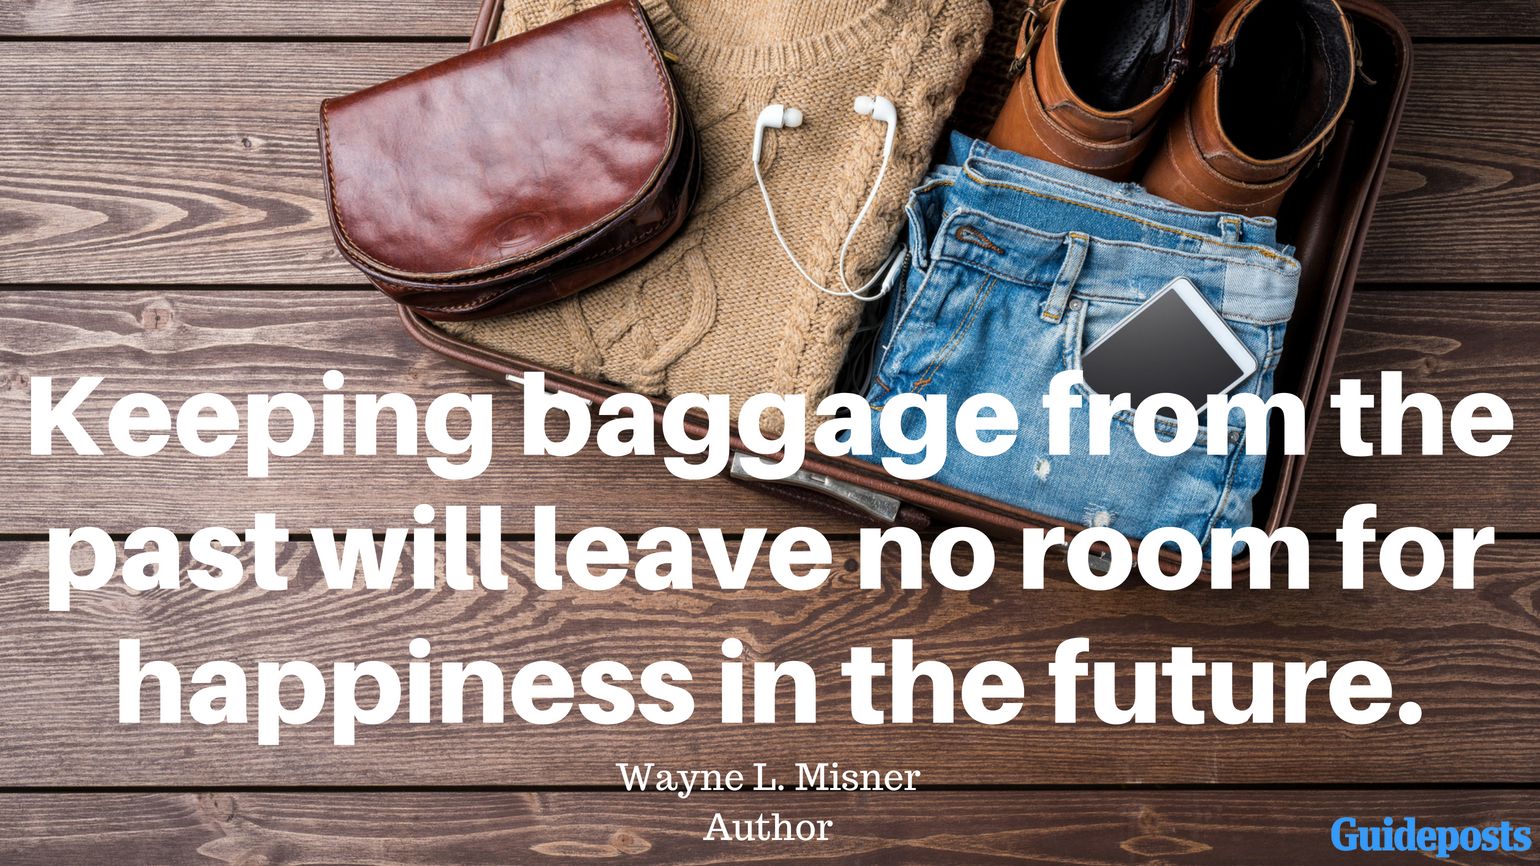 Motivational Quotes for Decluttering: Keeping baggage from the past will leave no room for happiness in the future. - Wayne L. Misner, Author better living life advice